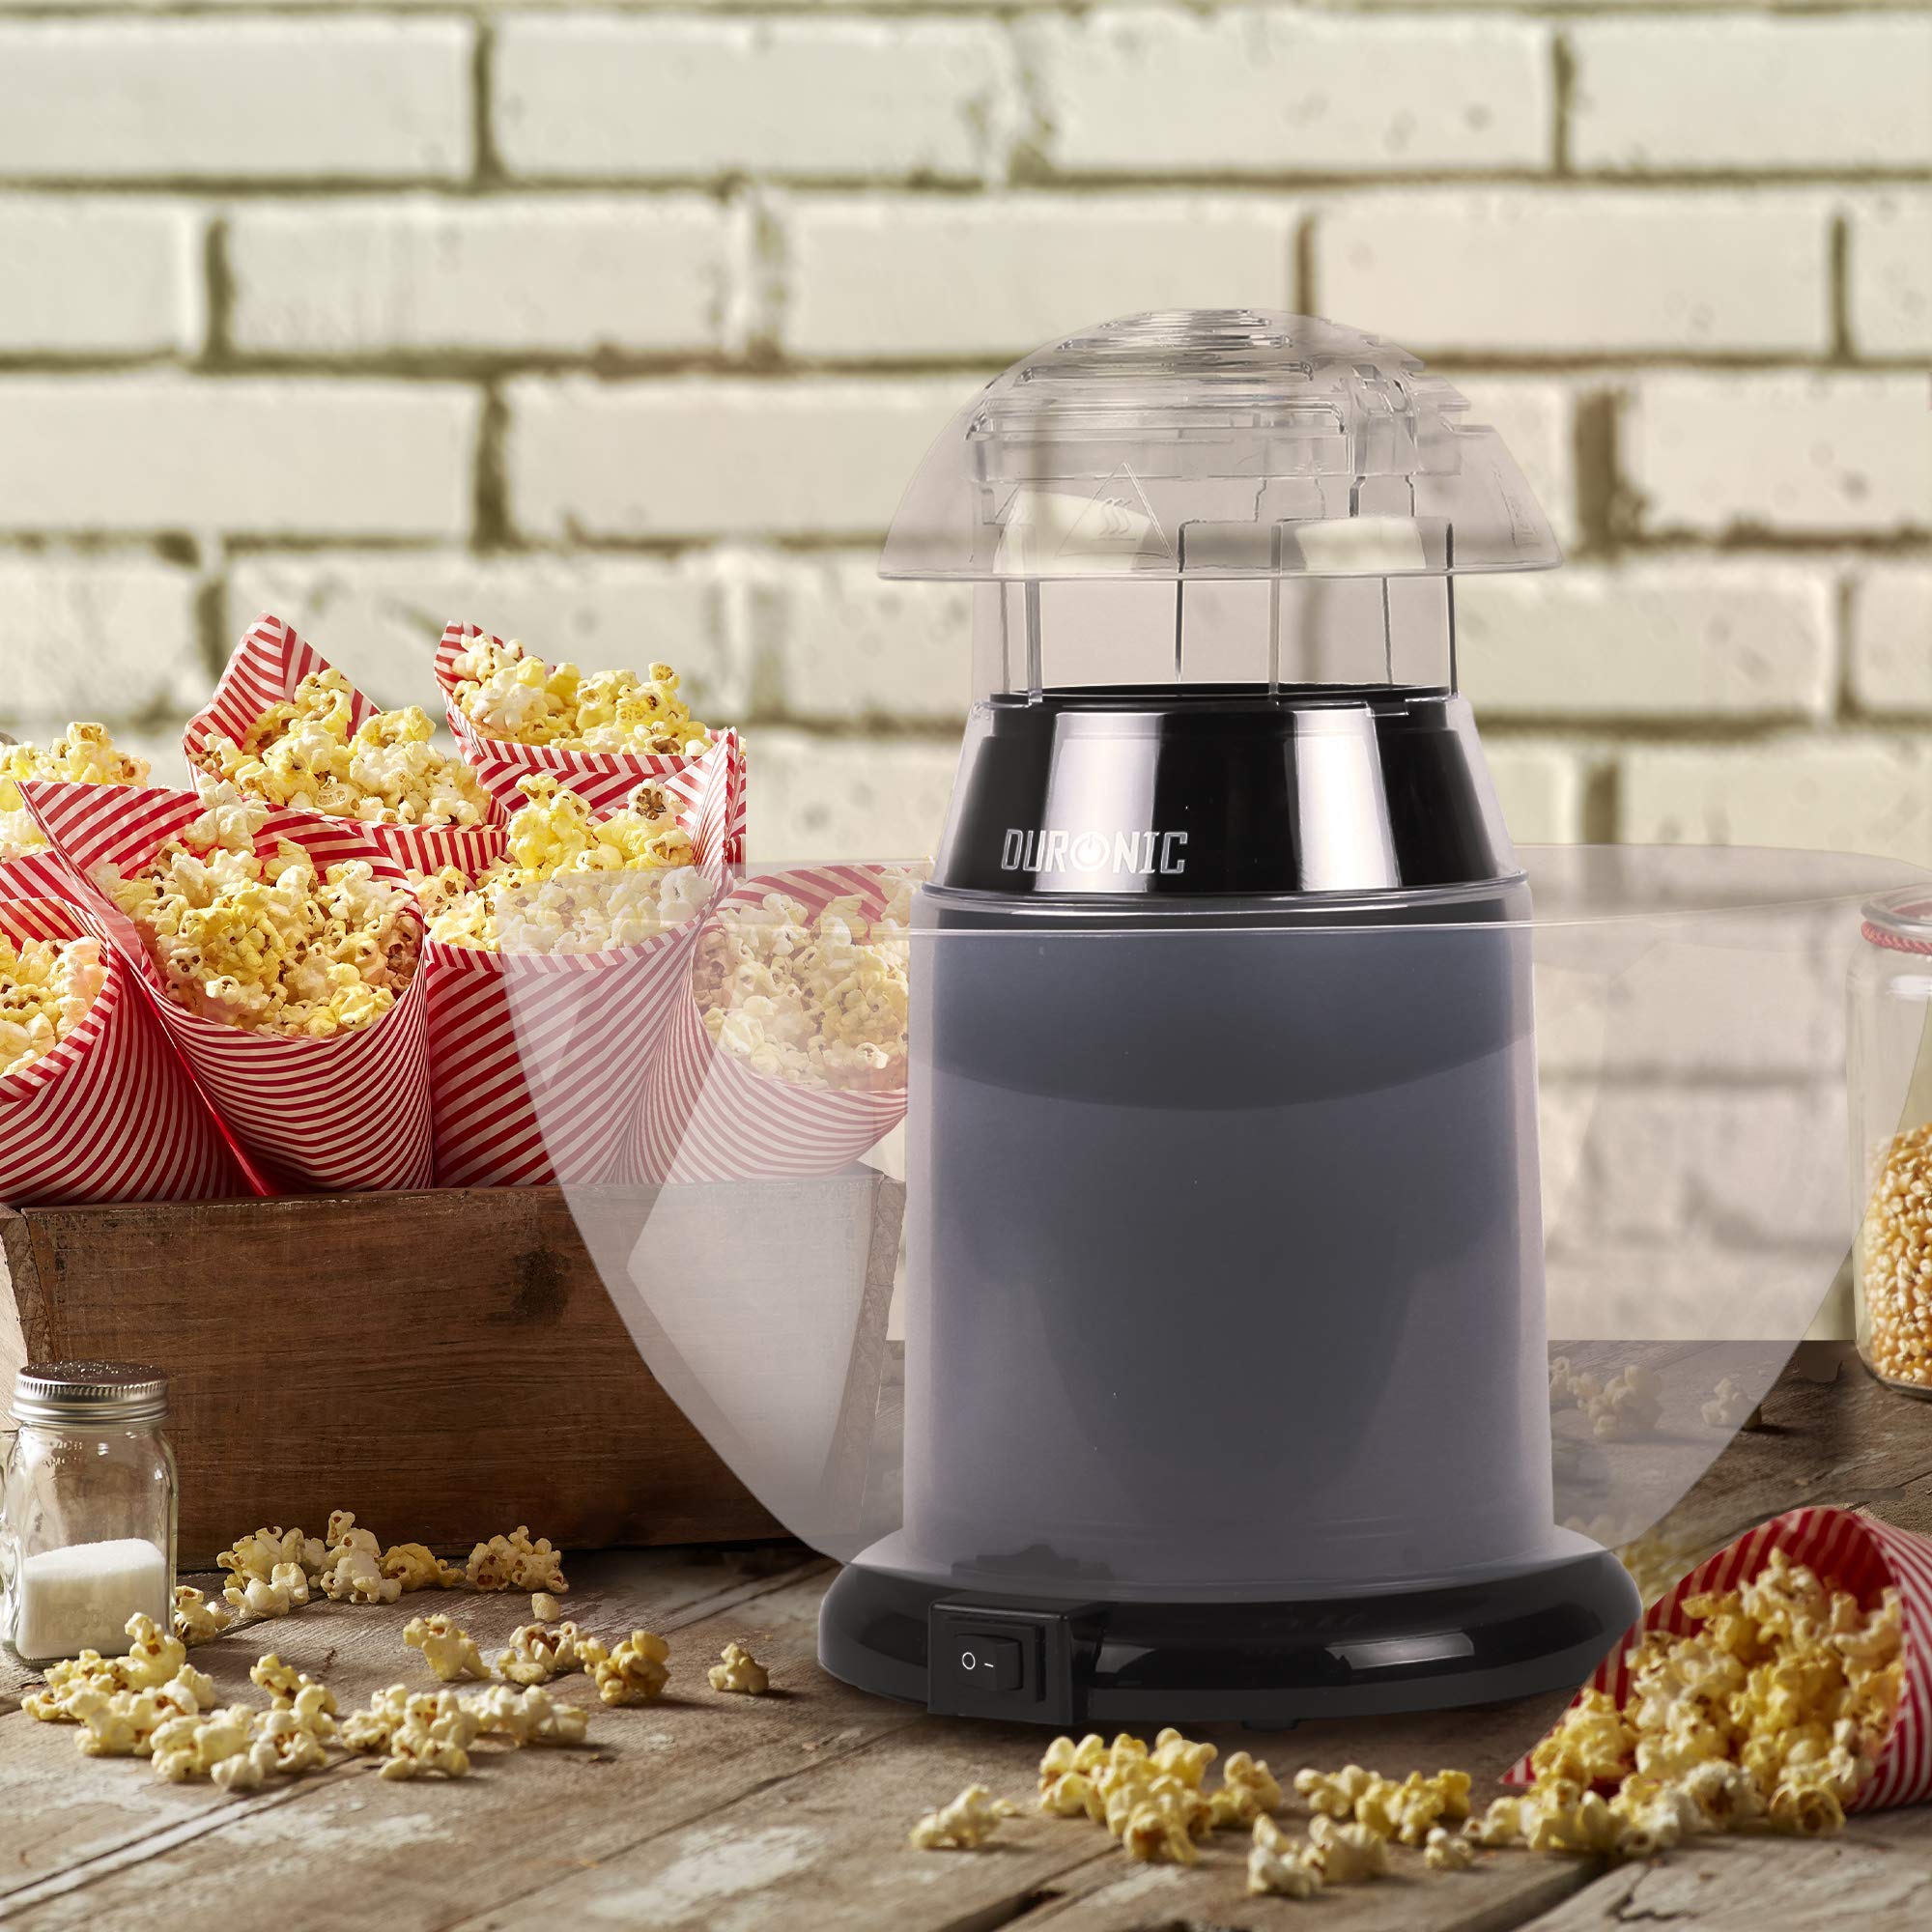 Duronic Popcorn Maker POP50 /BK [BLACK]| Hot Air Corn Popper | Make Homemade Healthy Oil-Free Popcorn | Low Calorie Snacking | Comes with Measuring Cup and Serving Bowl | 1200W